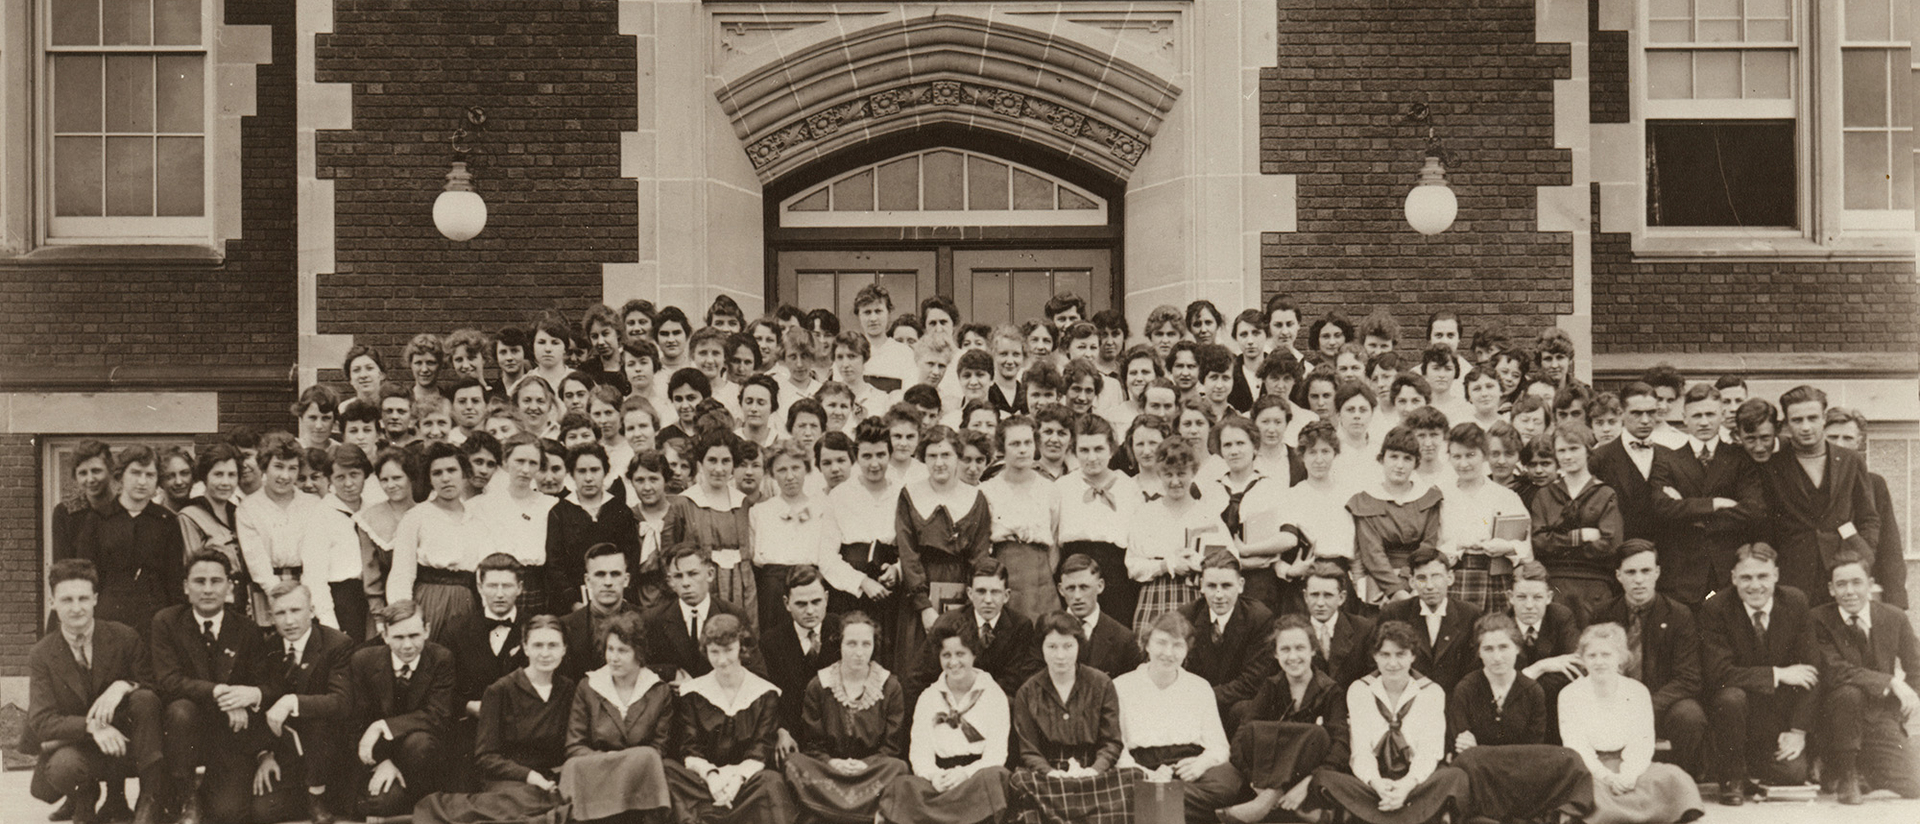 The class of 1916